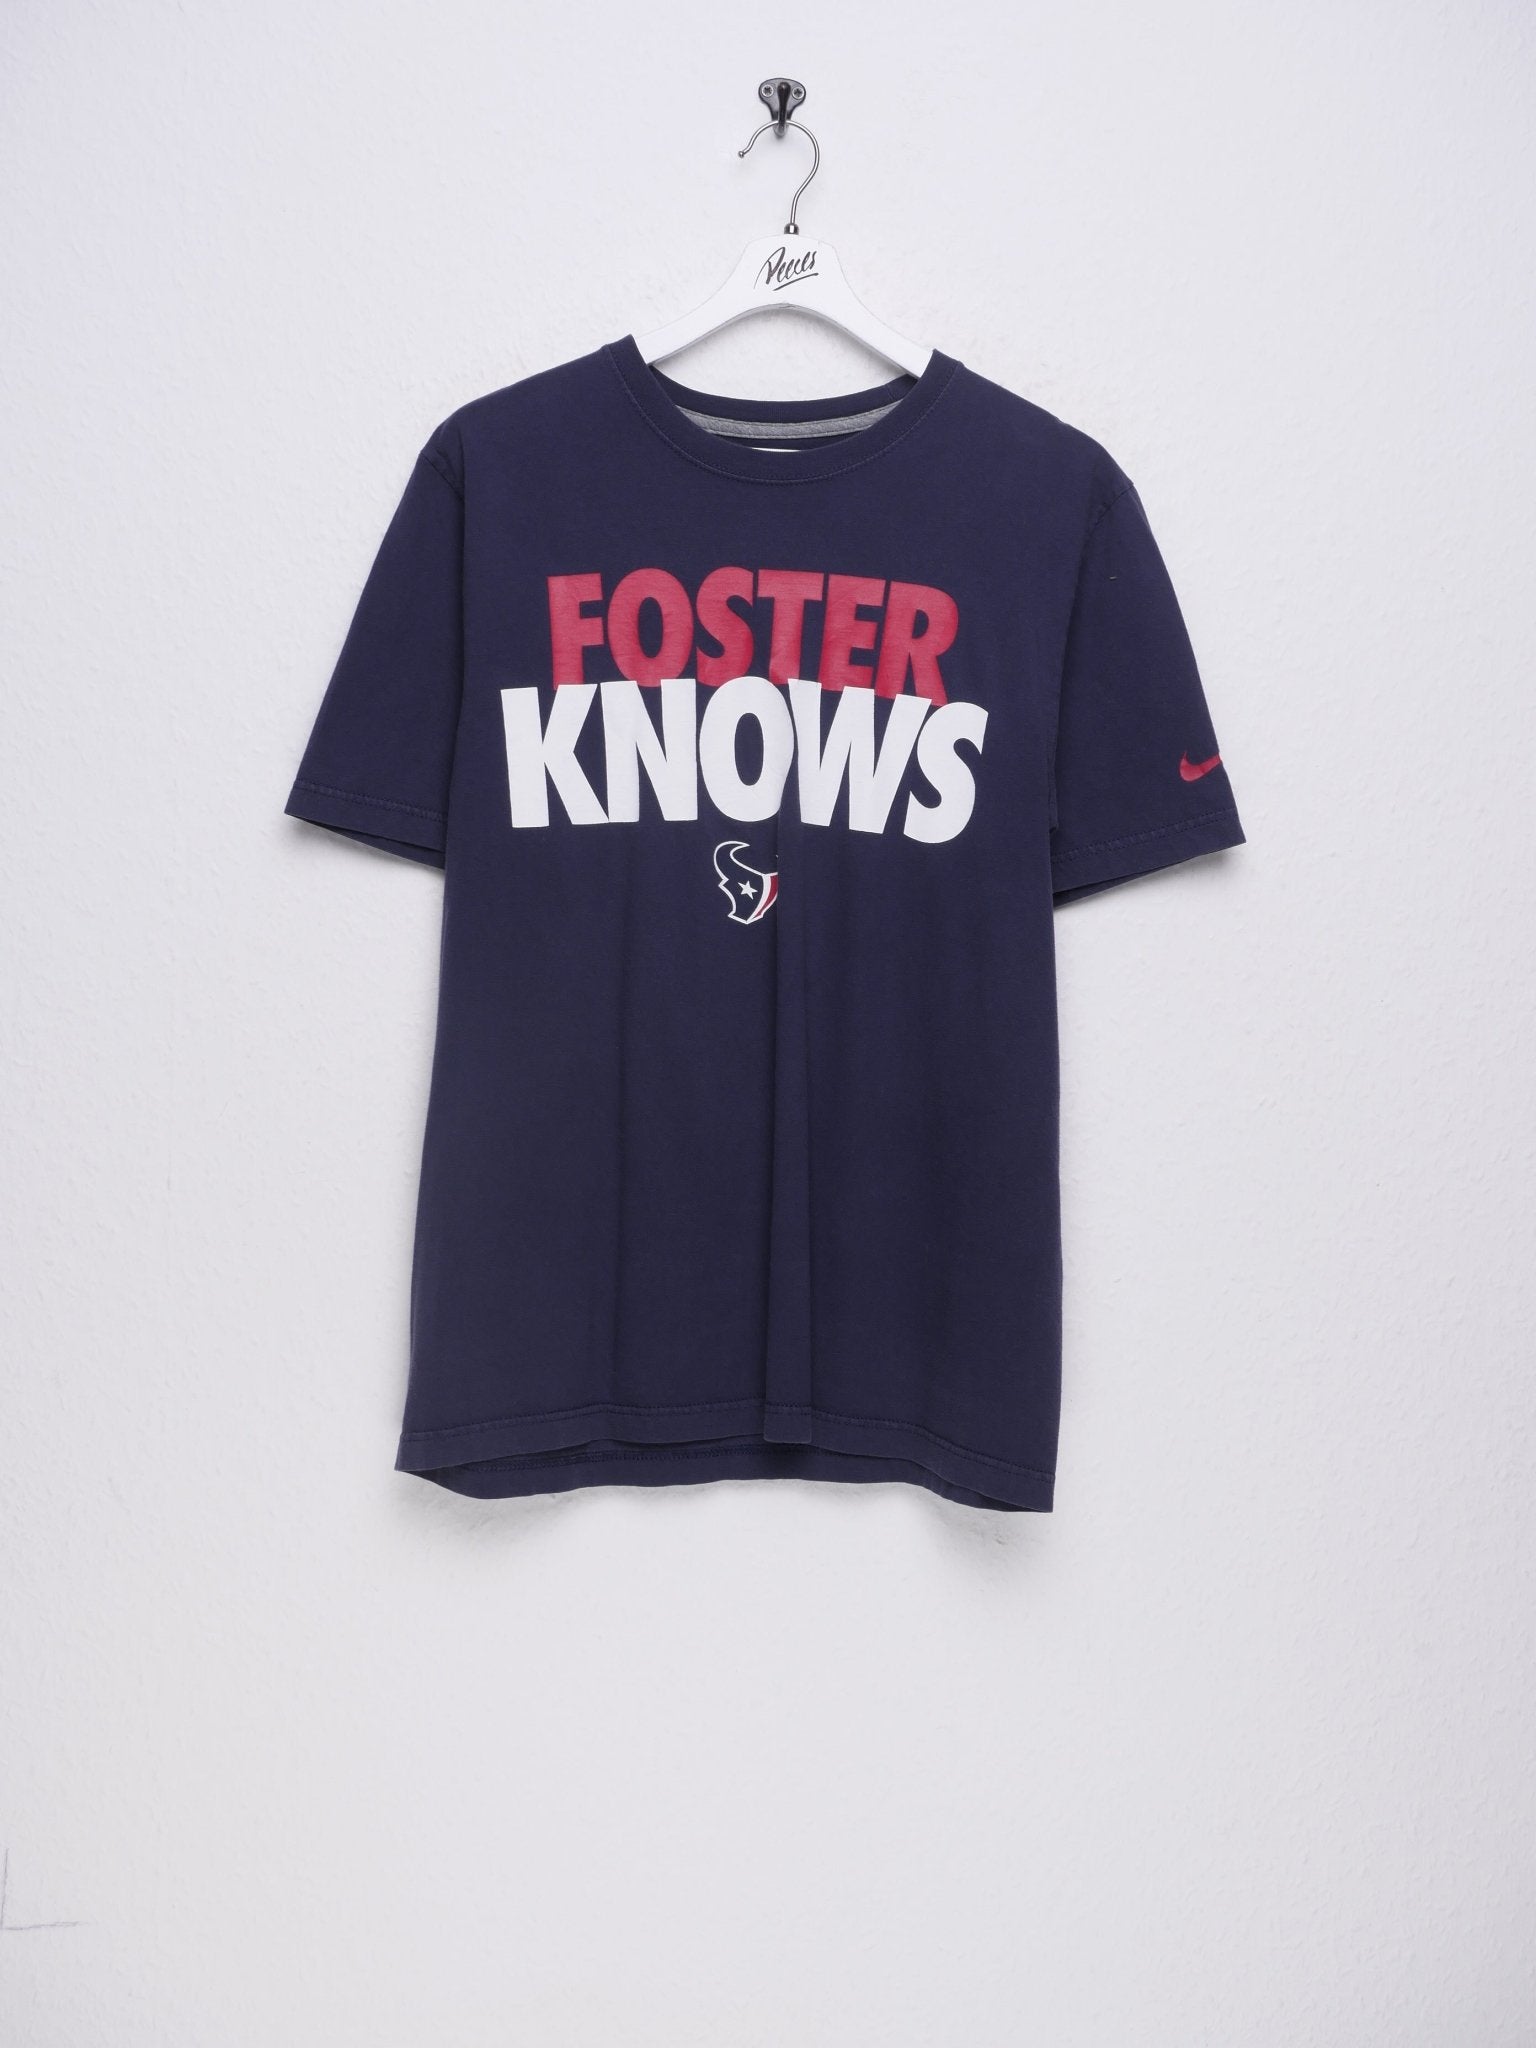 Nike Forster Knows printed Logo Shirt - Peeces